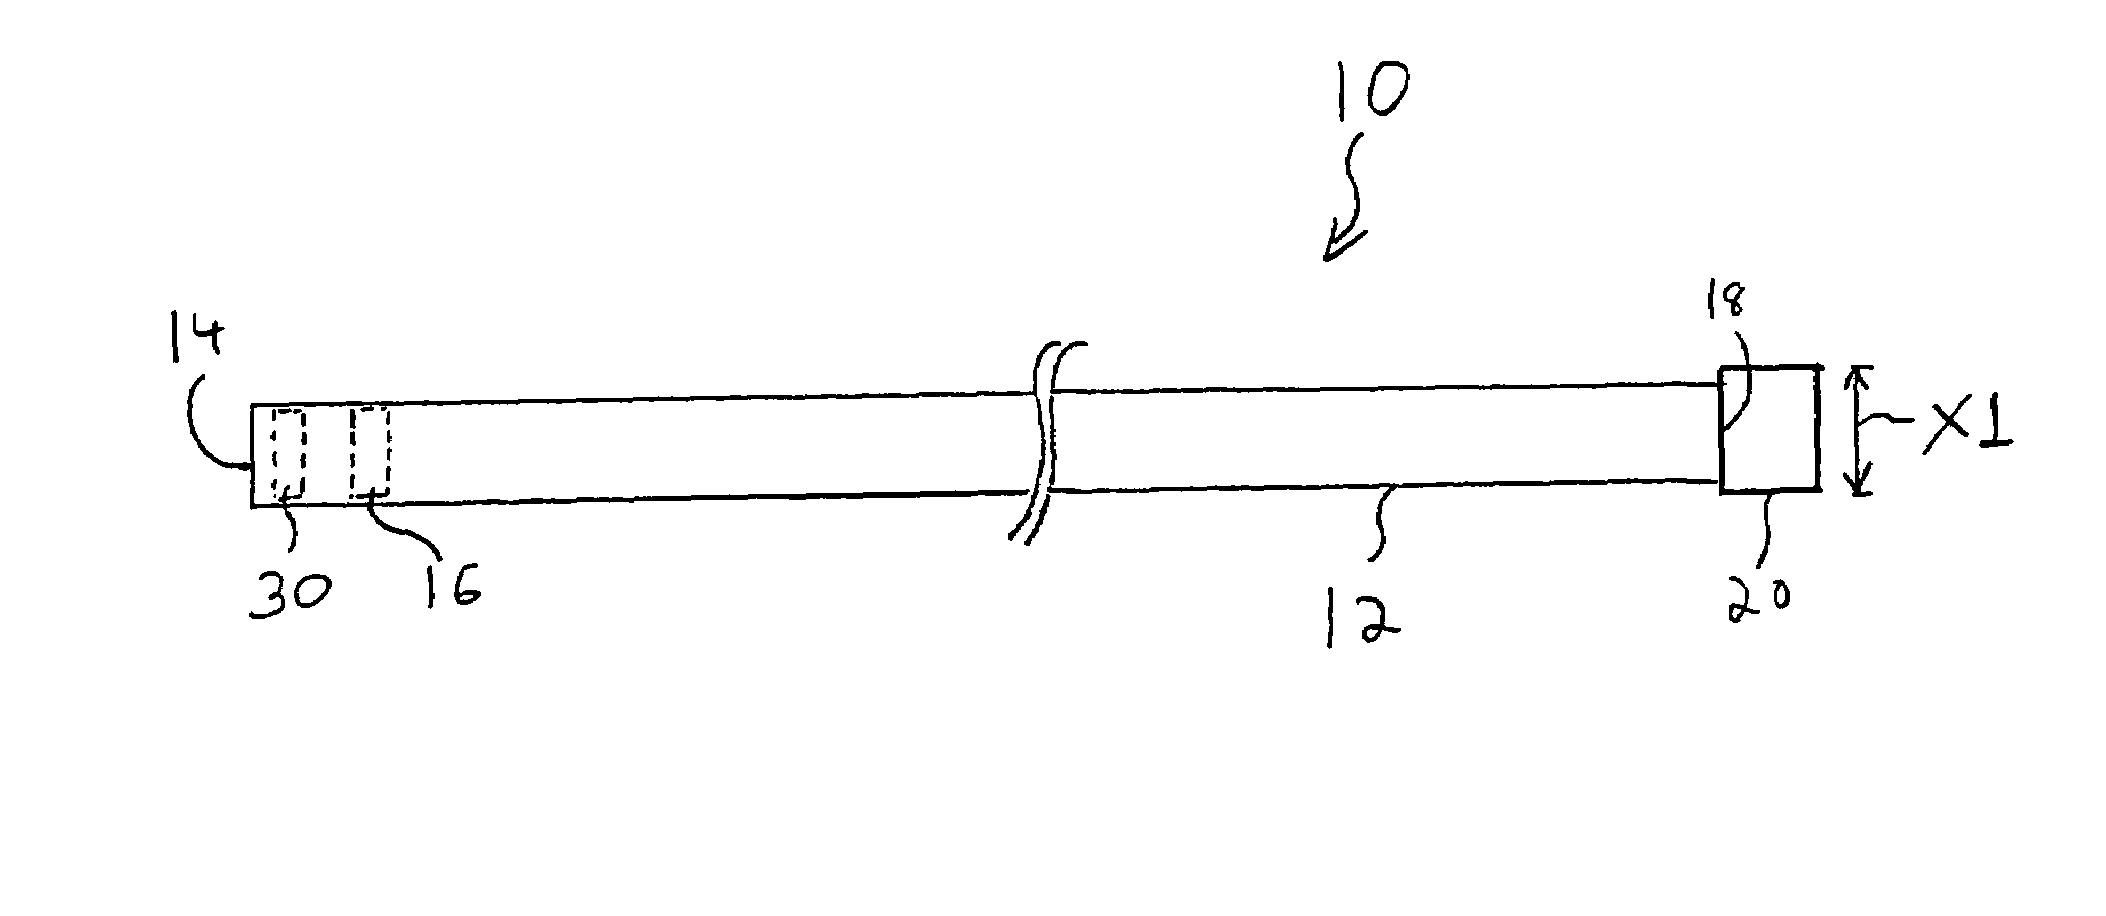 Vision catheter system including movable scanning plate